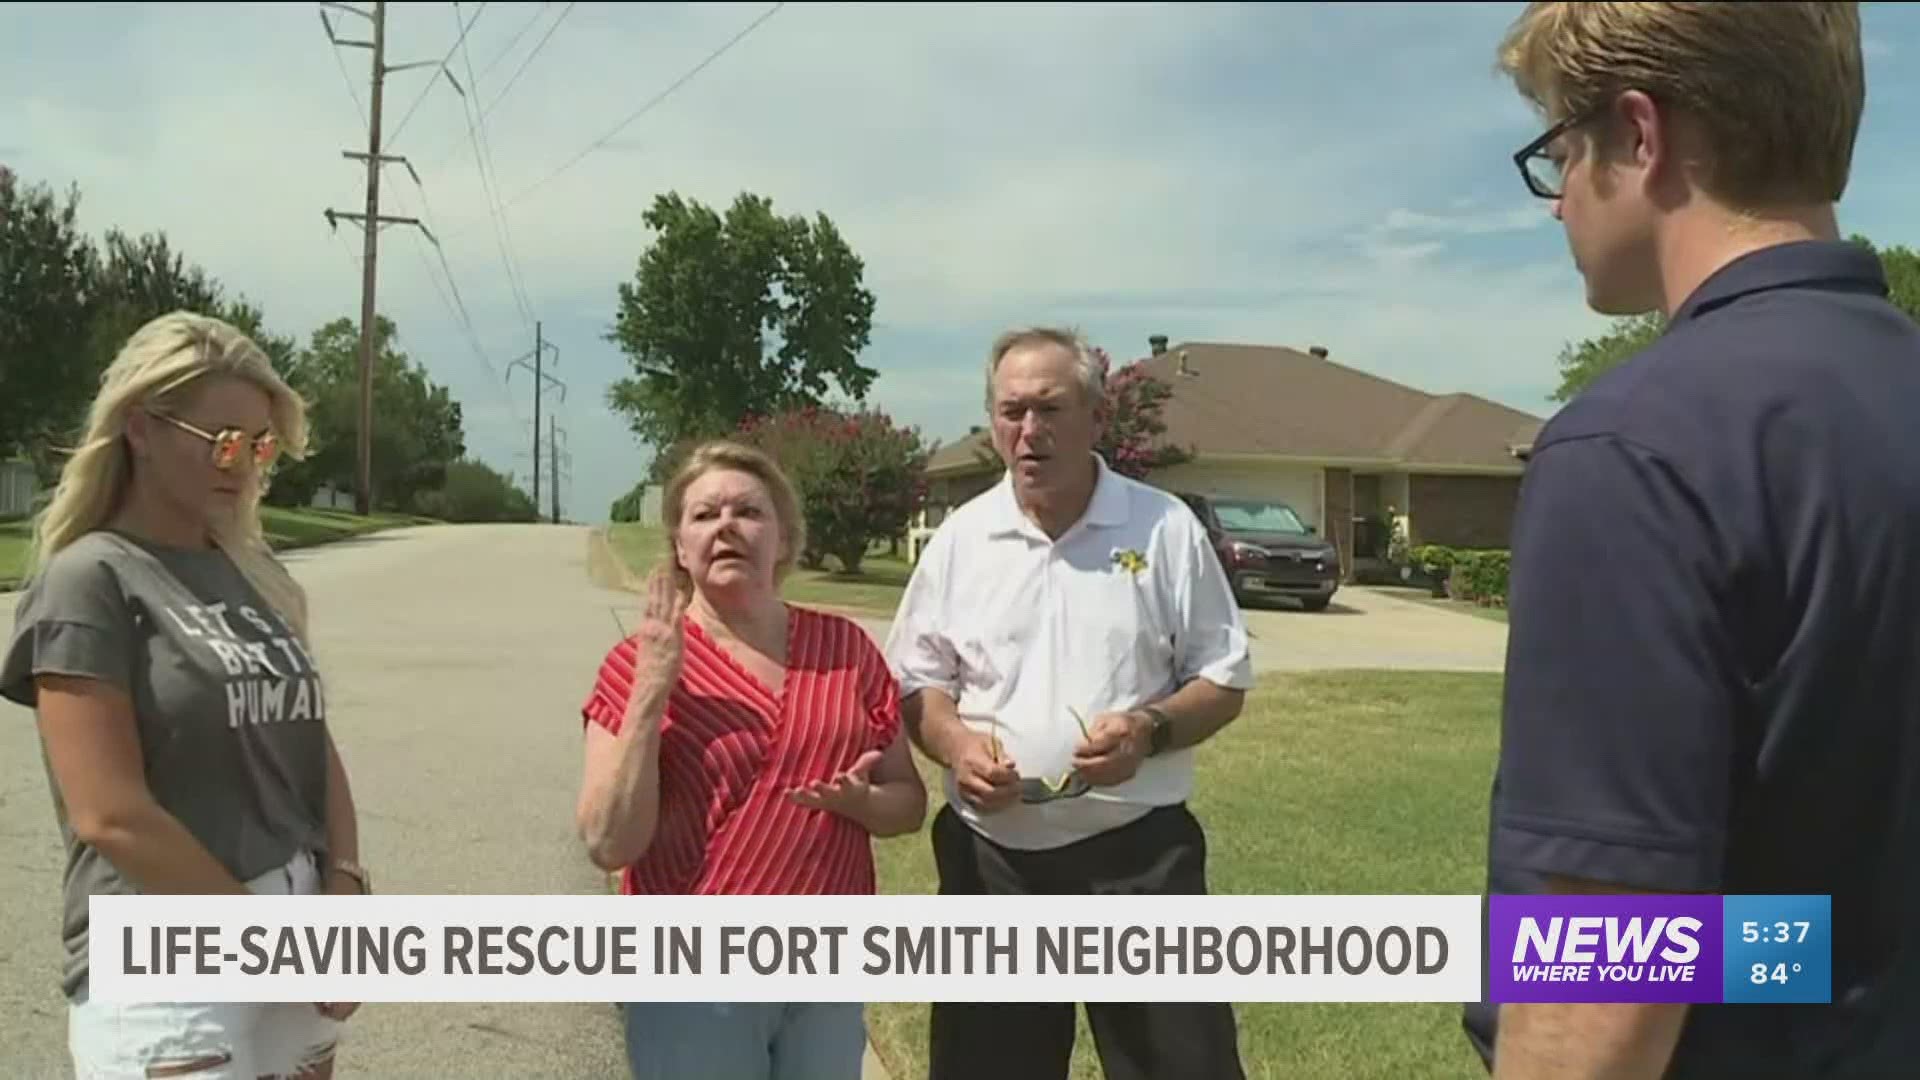 Life-saving rescue in Fort Smith neighborhood.